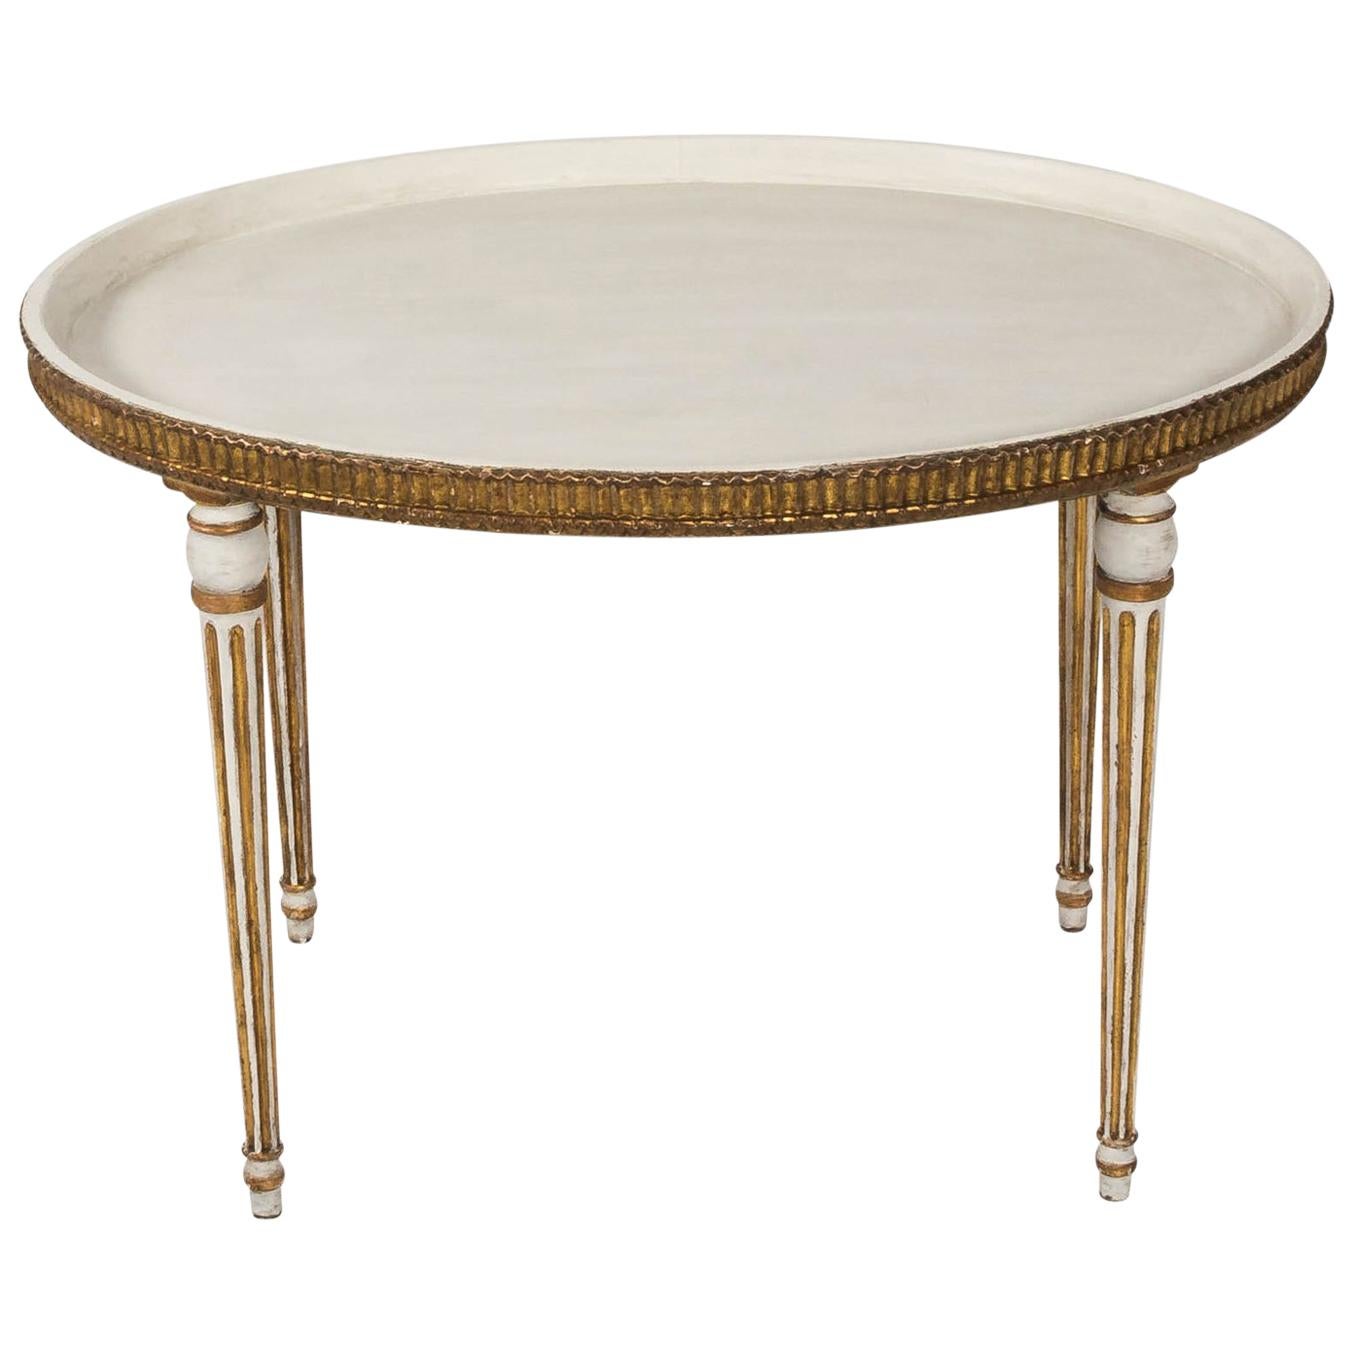 19th Century Neoclassical Oval Center Table